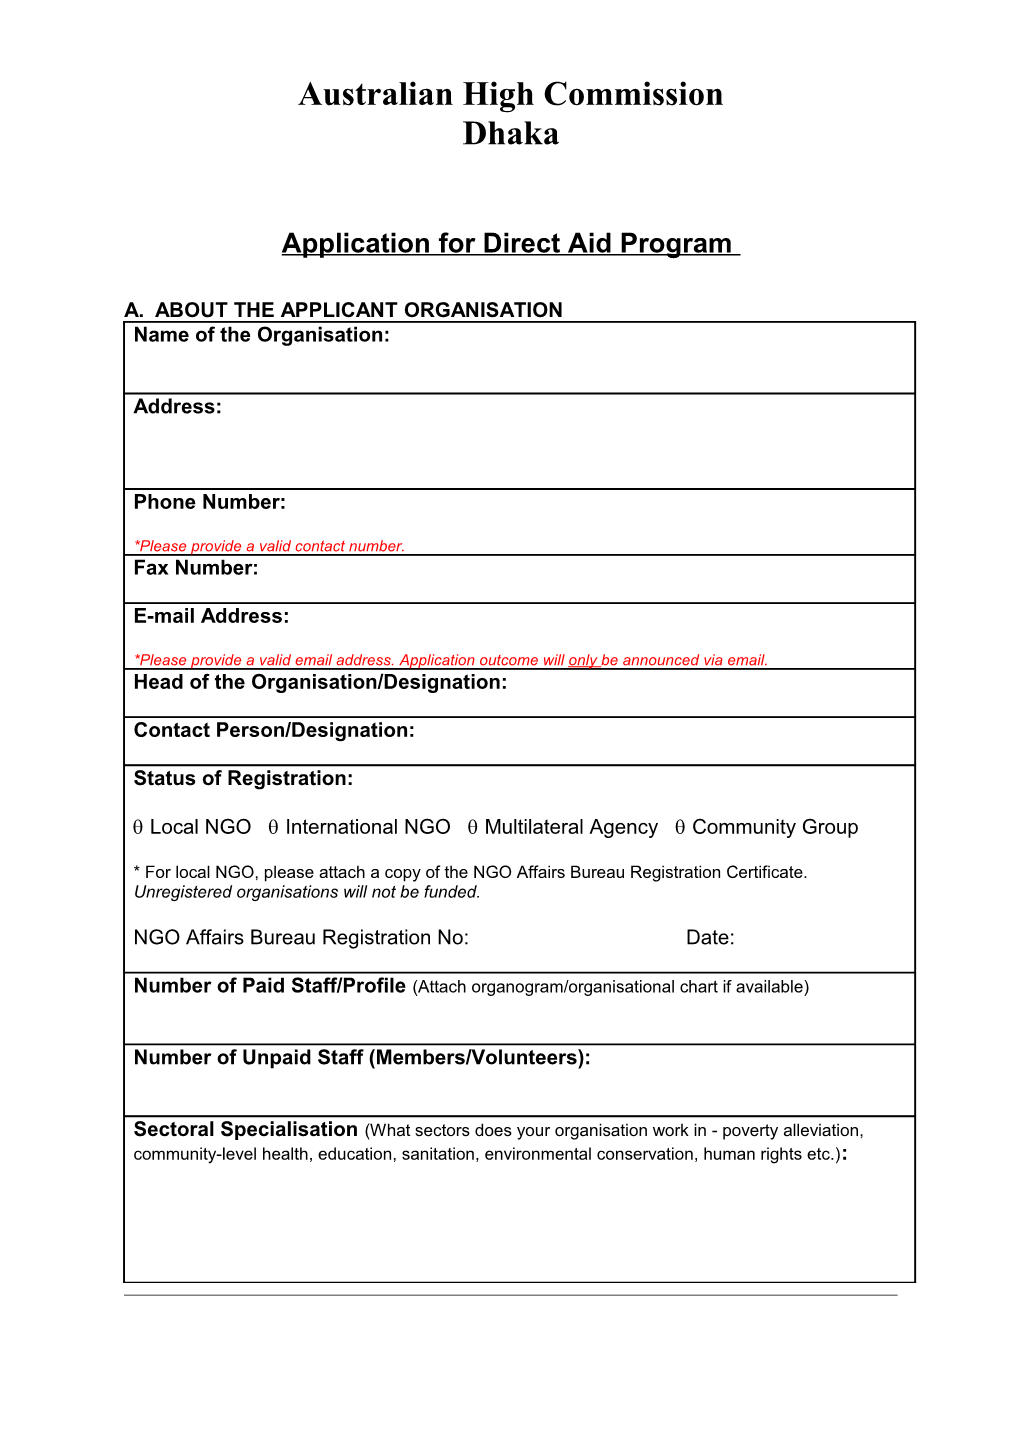 Application for Direct Aid Program